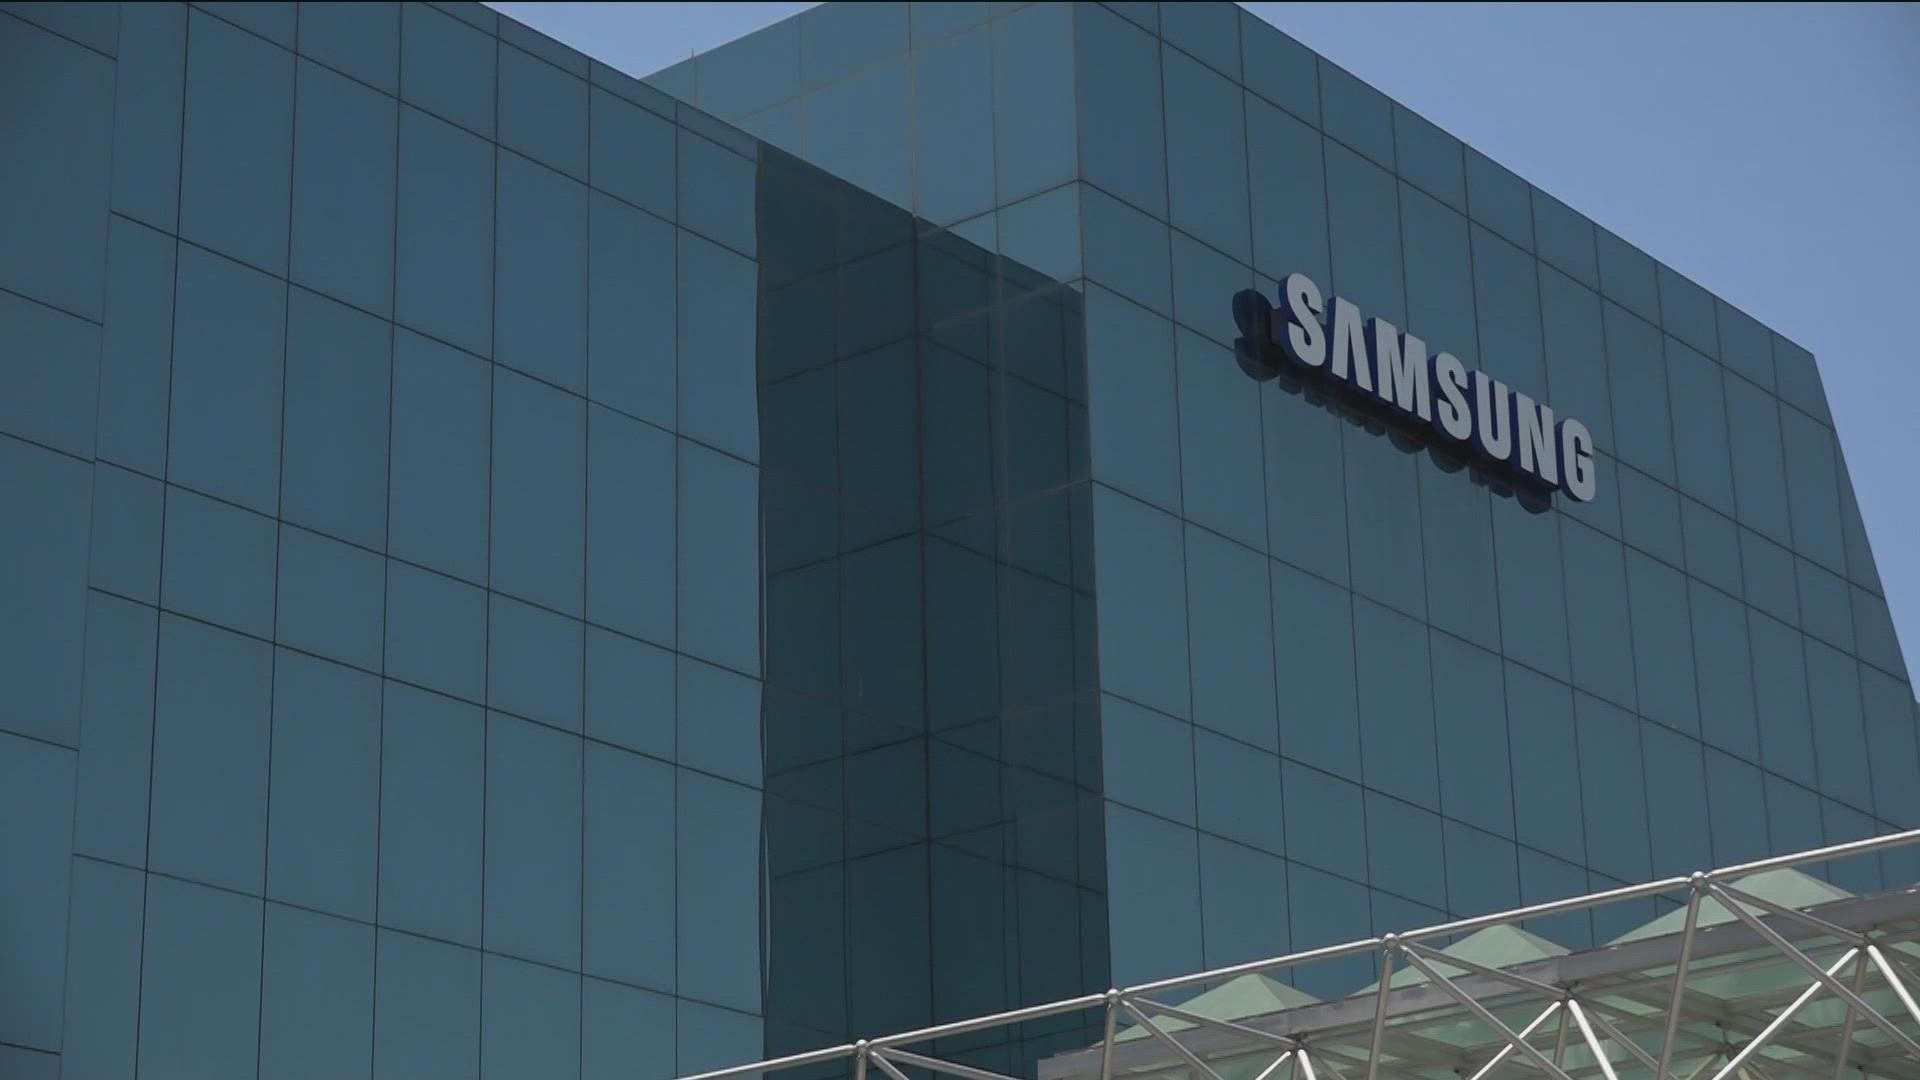 The bill incentivizes semiconductor producers to do business in the U.S. and could potentially fuel an unprecedented expansion for Samsung in Central Texas.